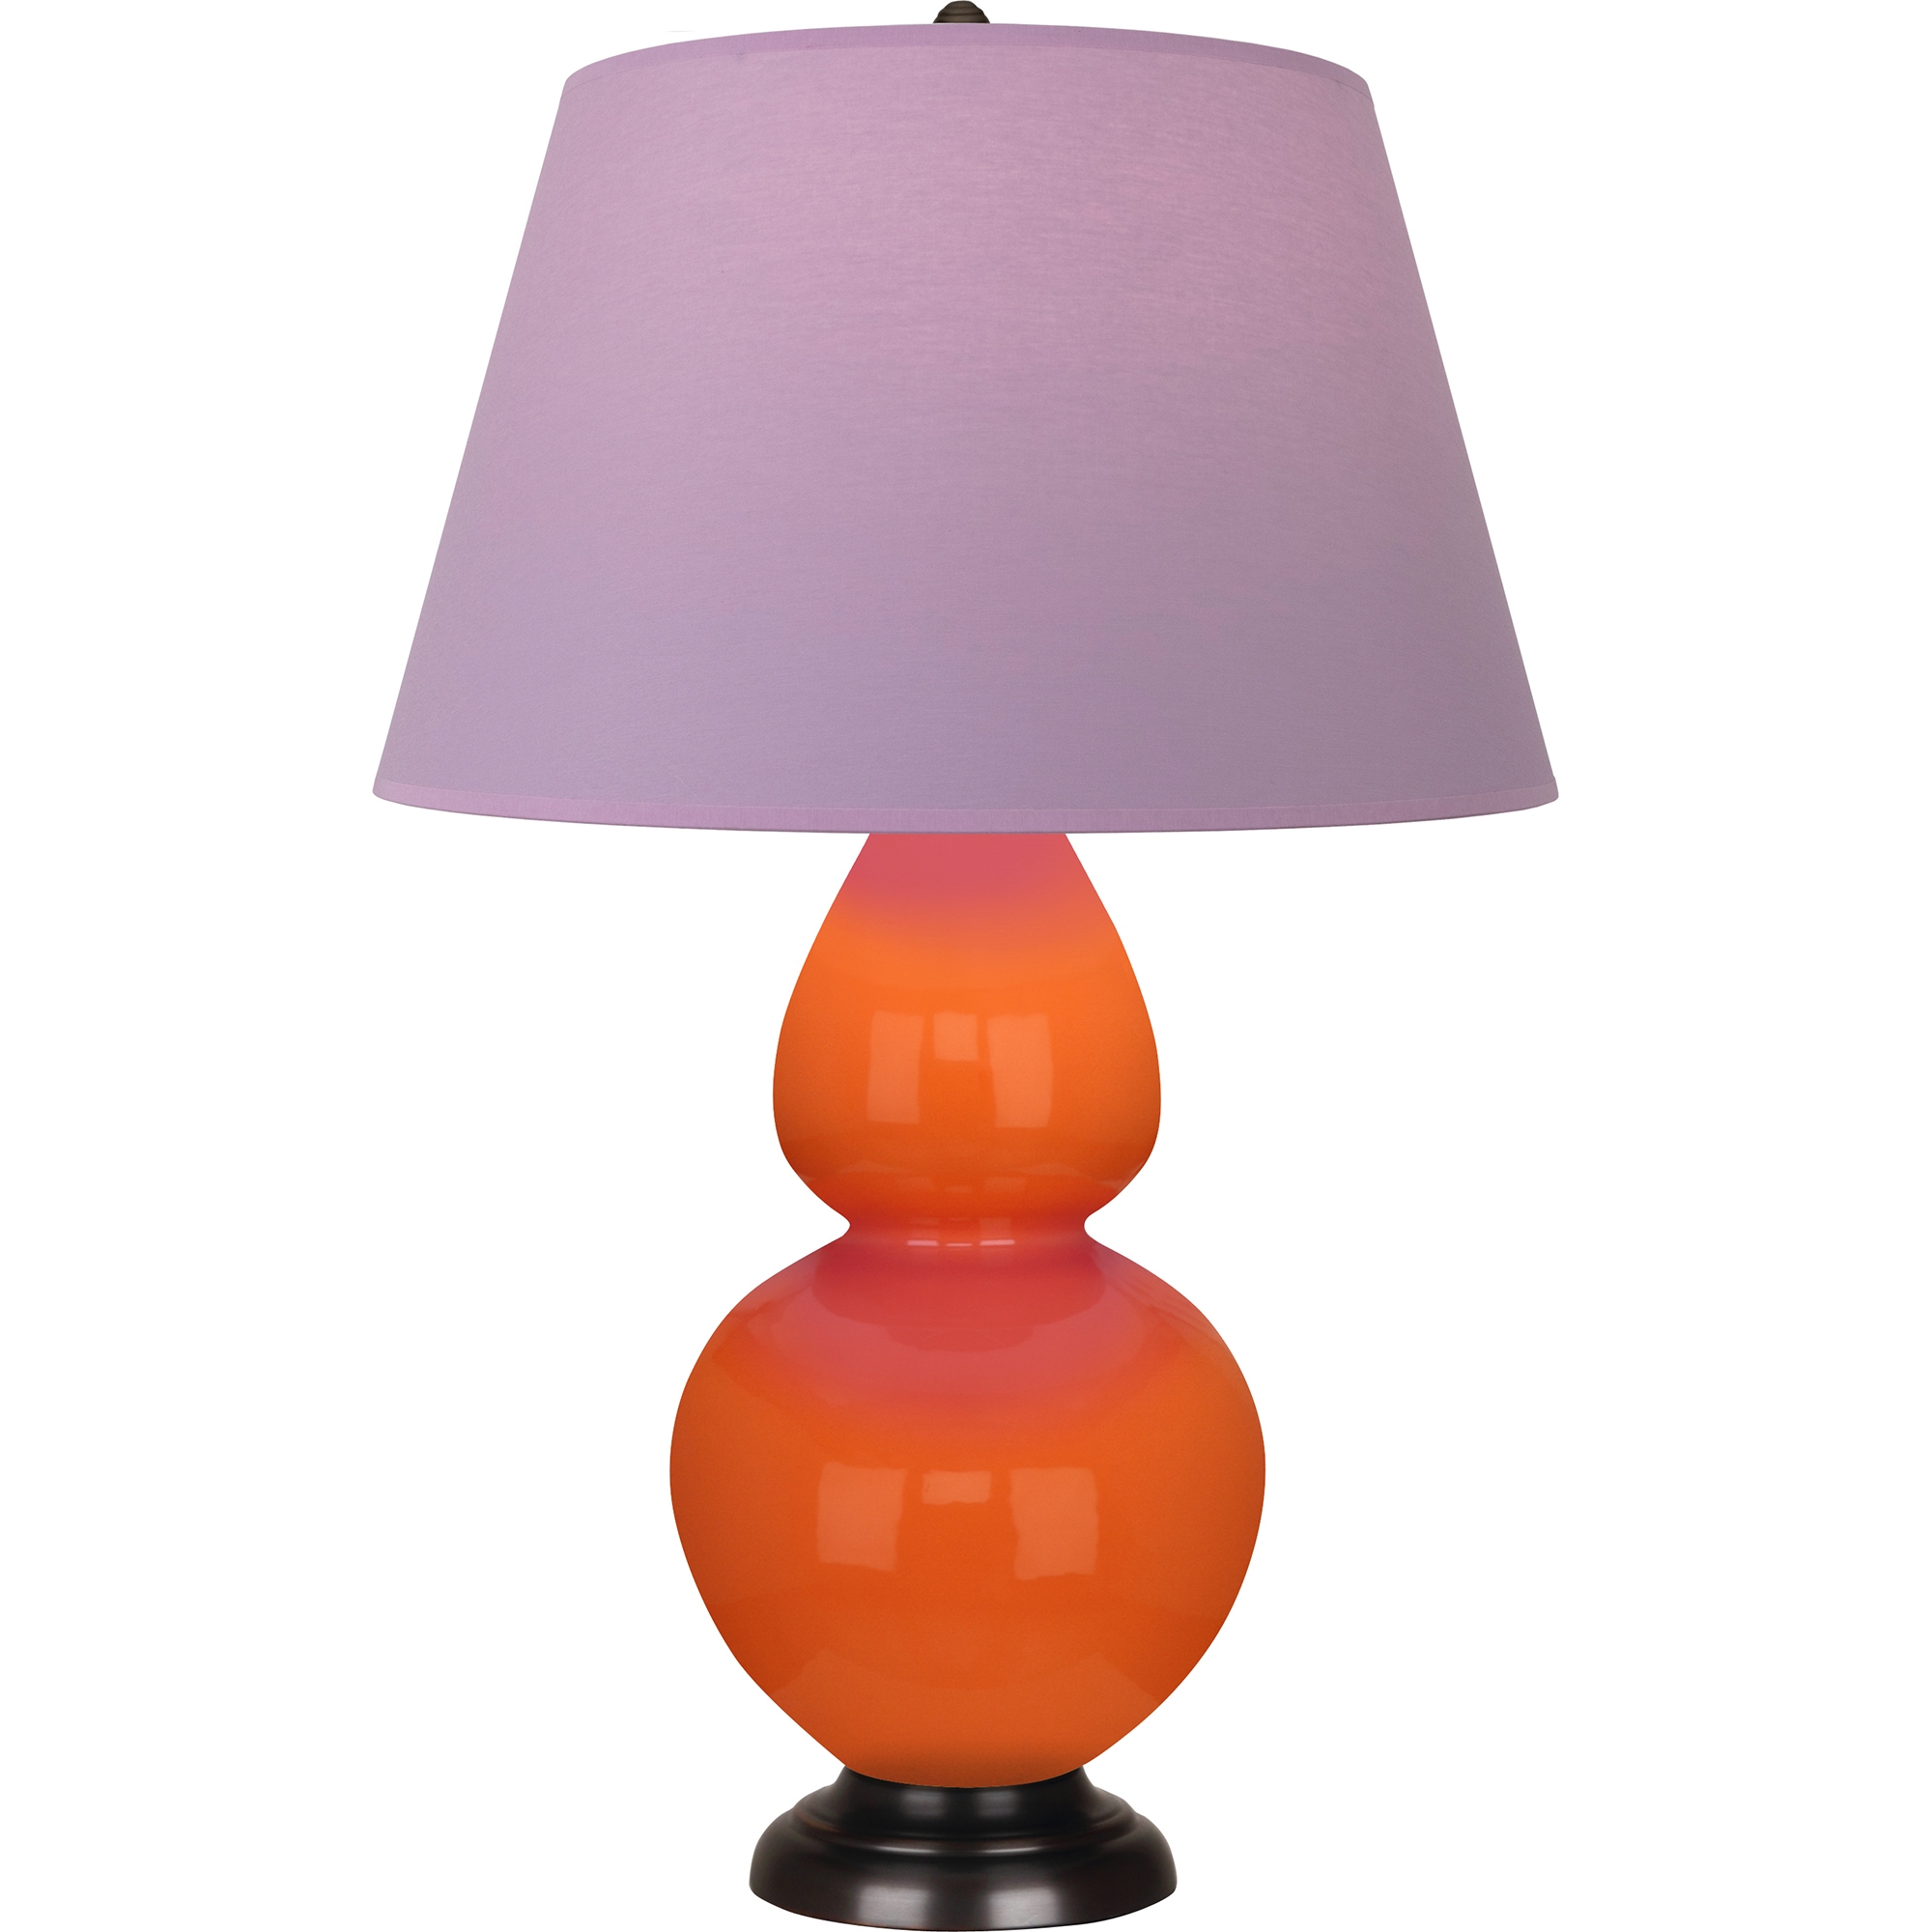 Double Gourd Table Lamp Style #1645L